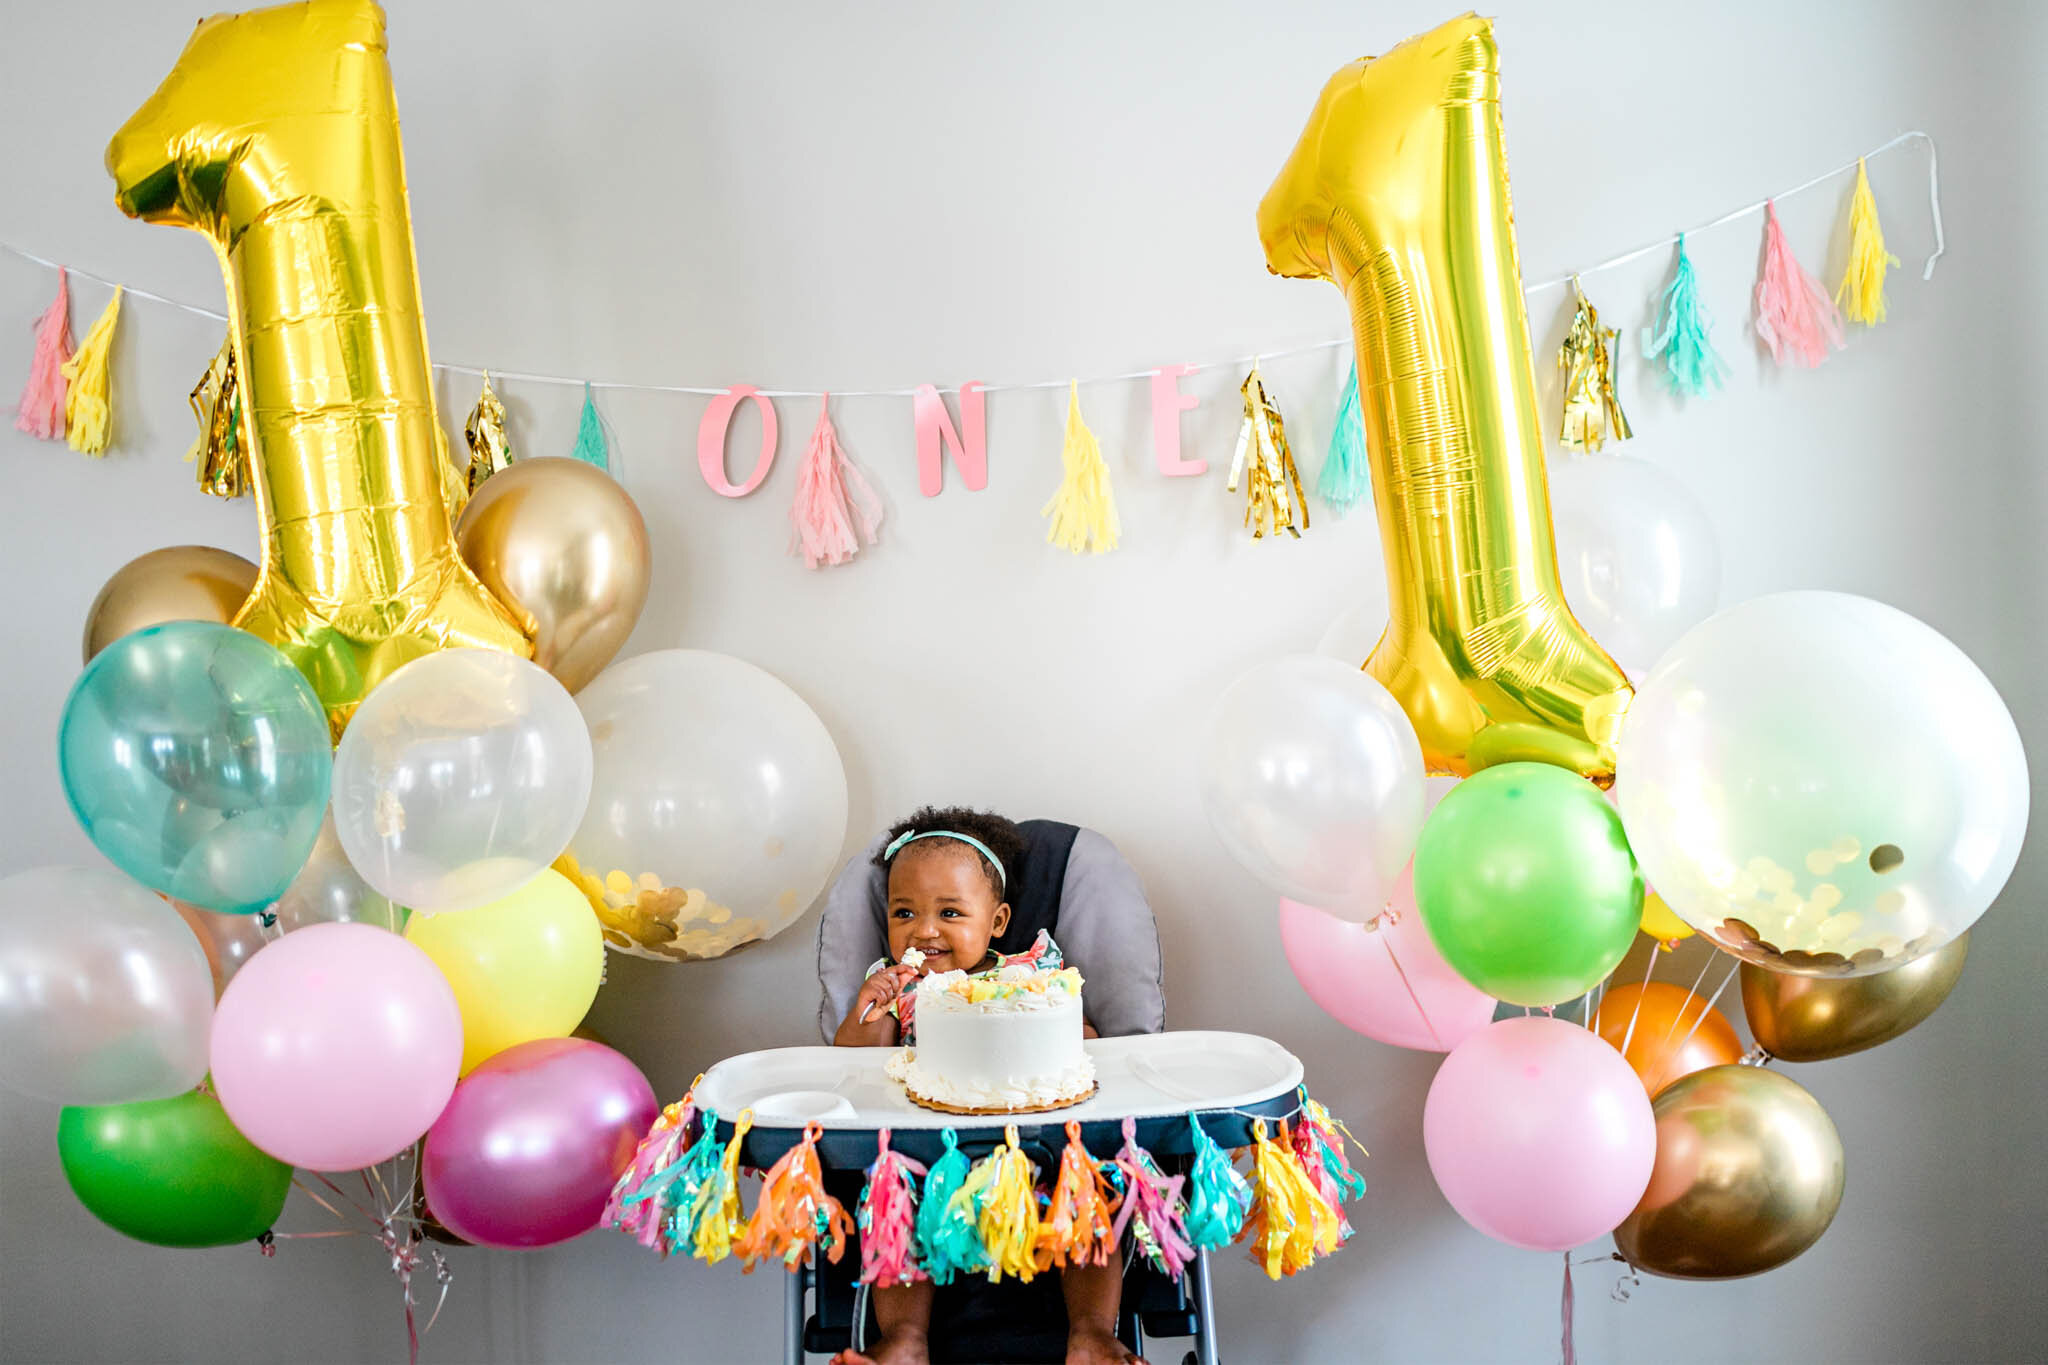 Durham Family Photographer | By G. Lin Photography | First birthday celebration | Baby girl turning one with balloons in the back